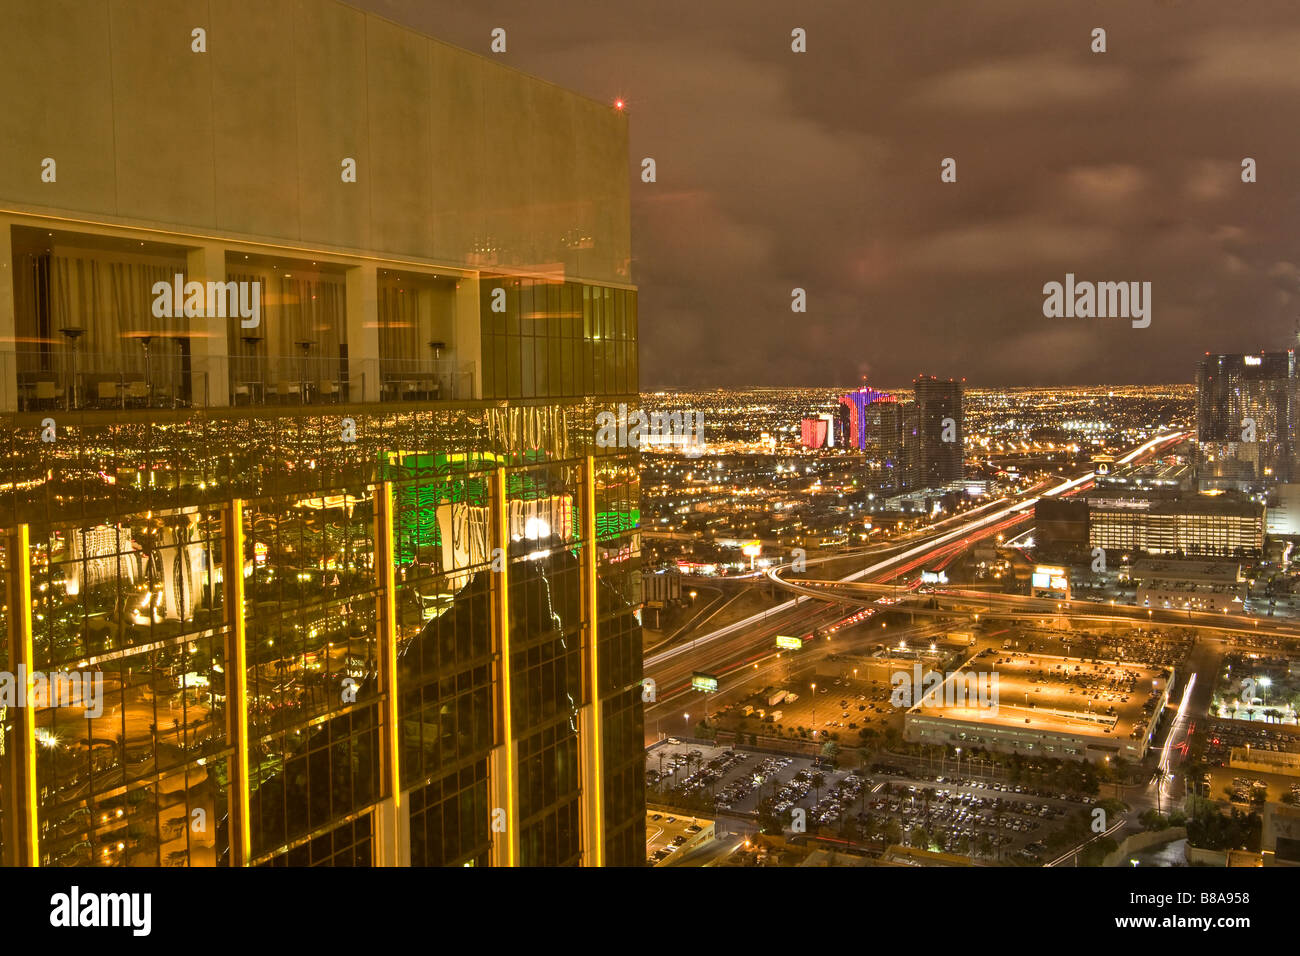 Aerial view of the Las Vegas Strip at night, Las Vegas, Nevada reflecting in the side of The Hotel at the Mandalay Bay Stock Photo